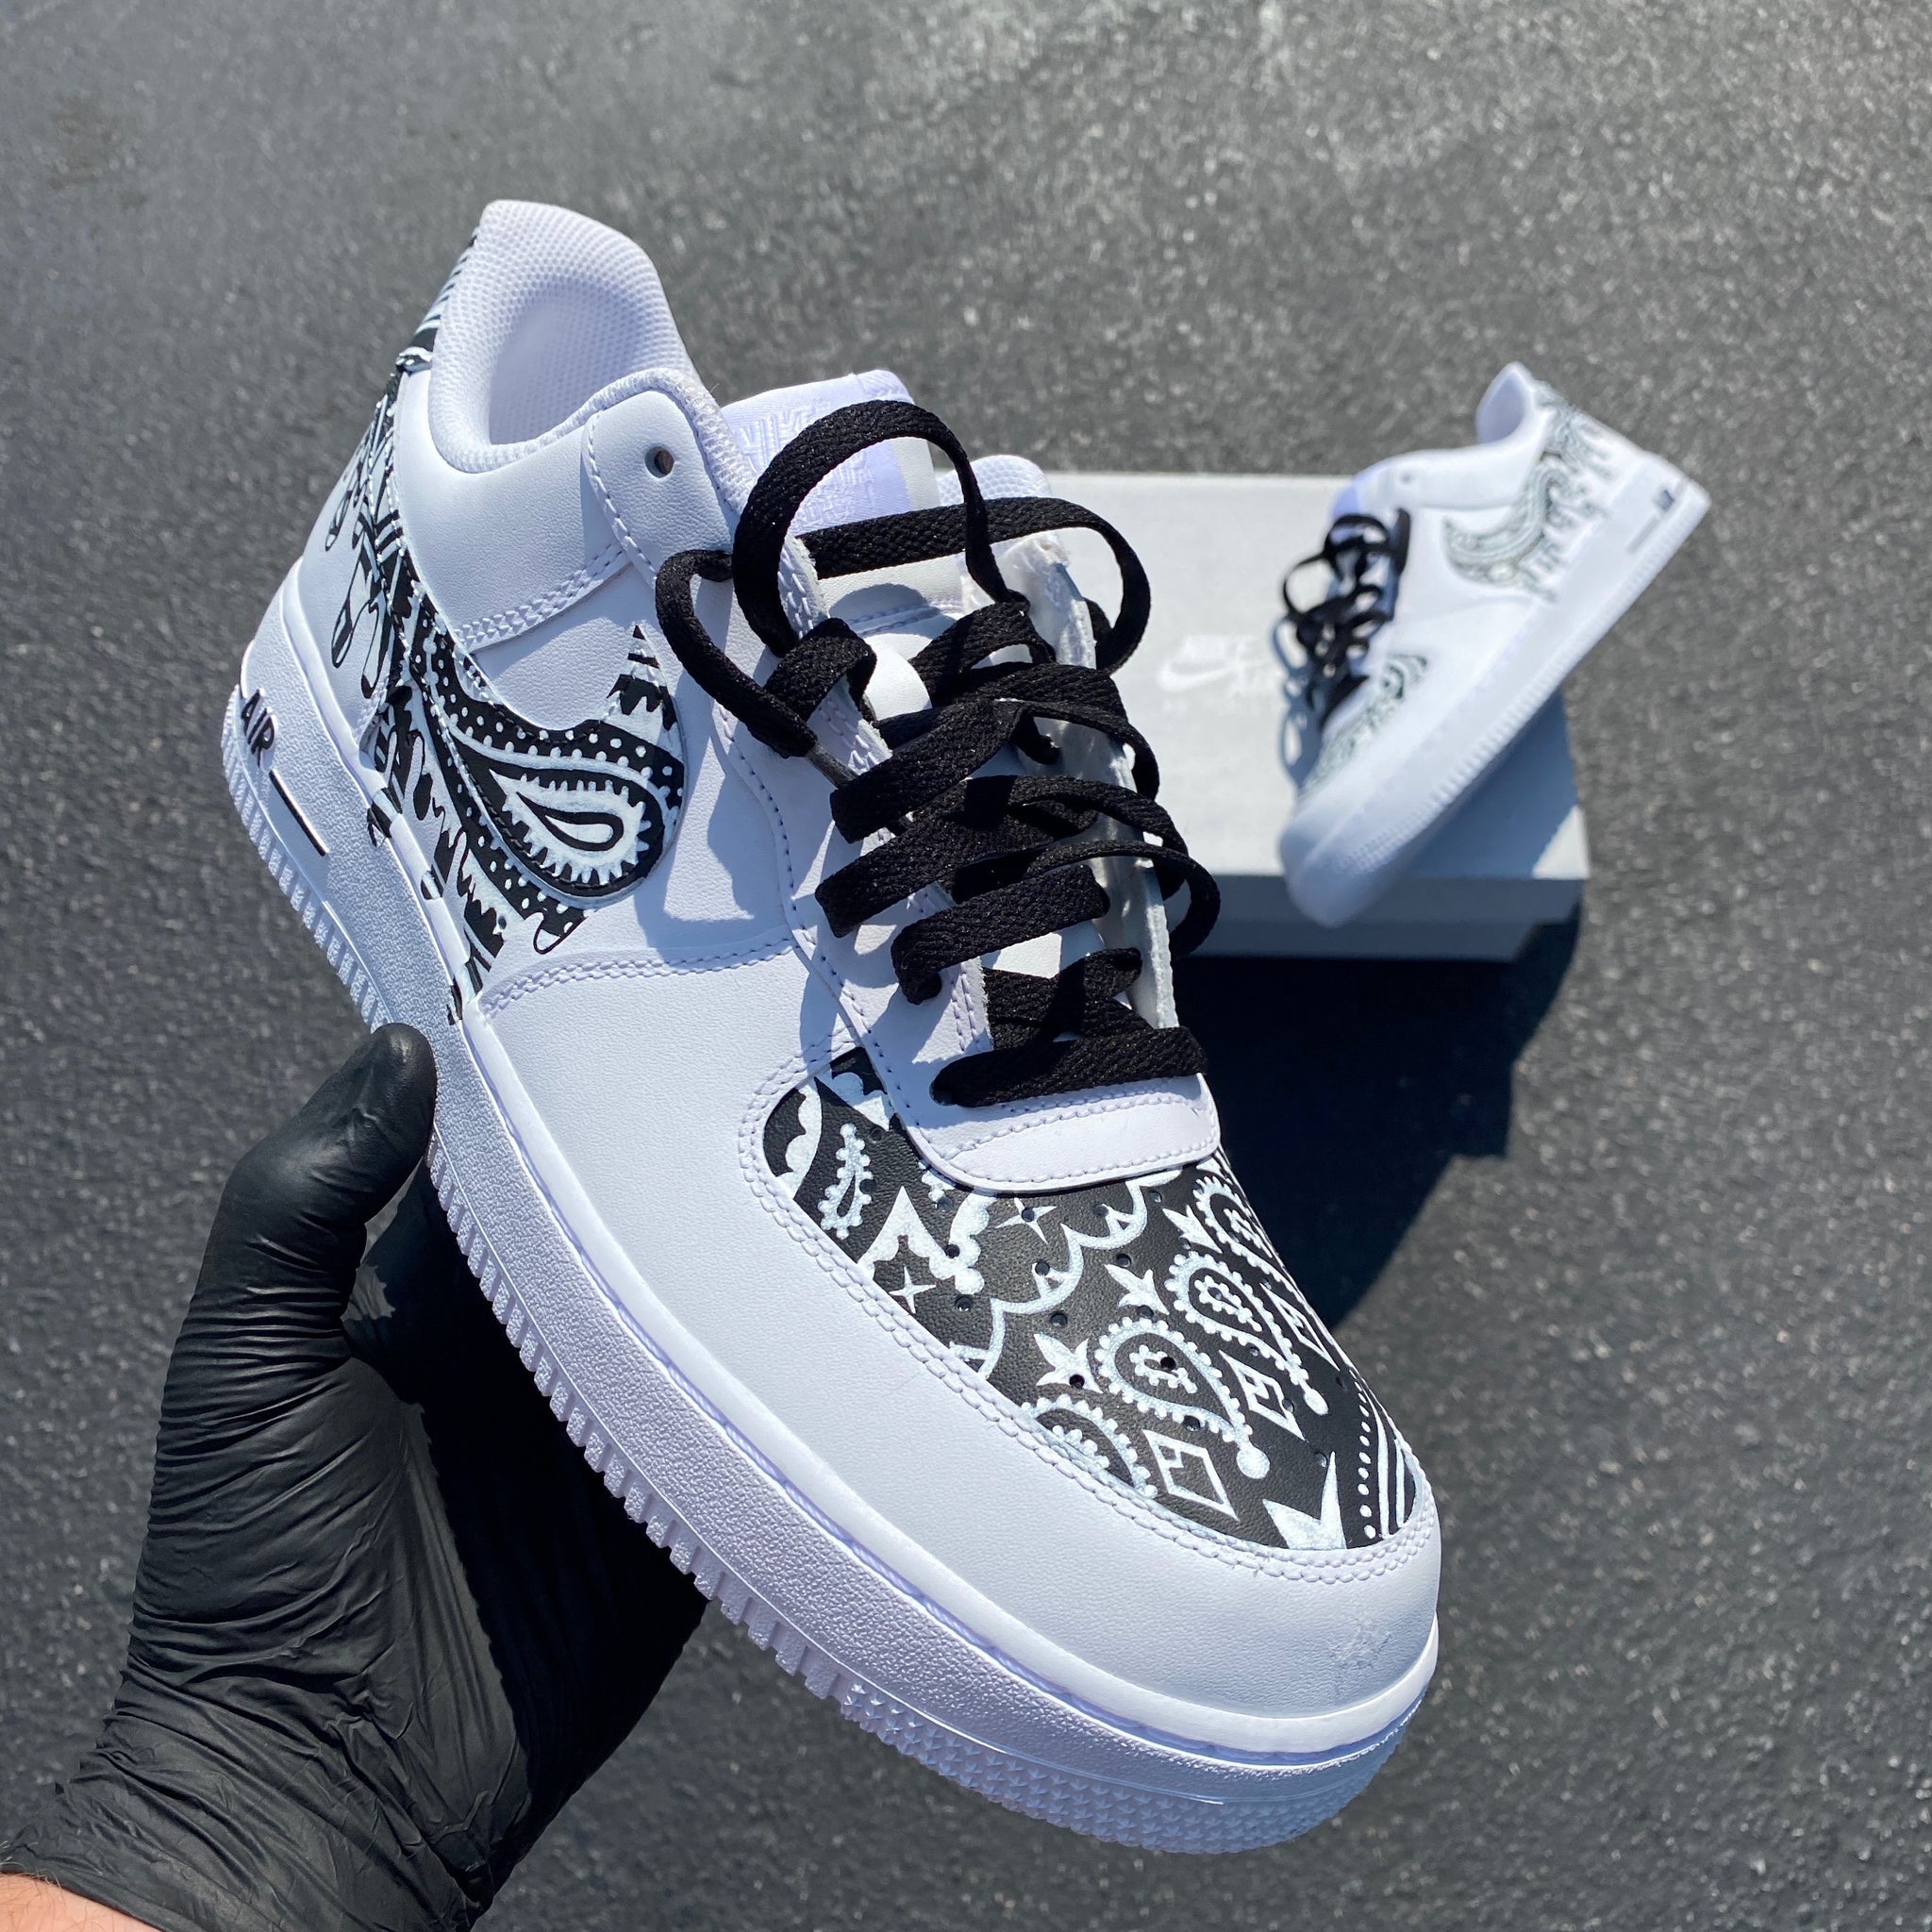 Black and Gray Custom Air Force 1 Low/Mid/High Sneakers Low / 8.5 M / 10 W